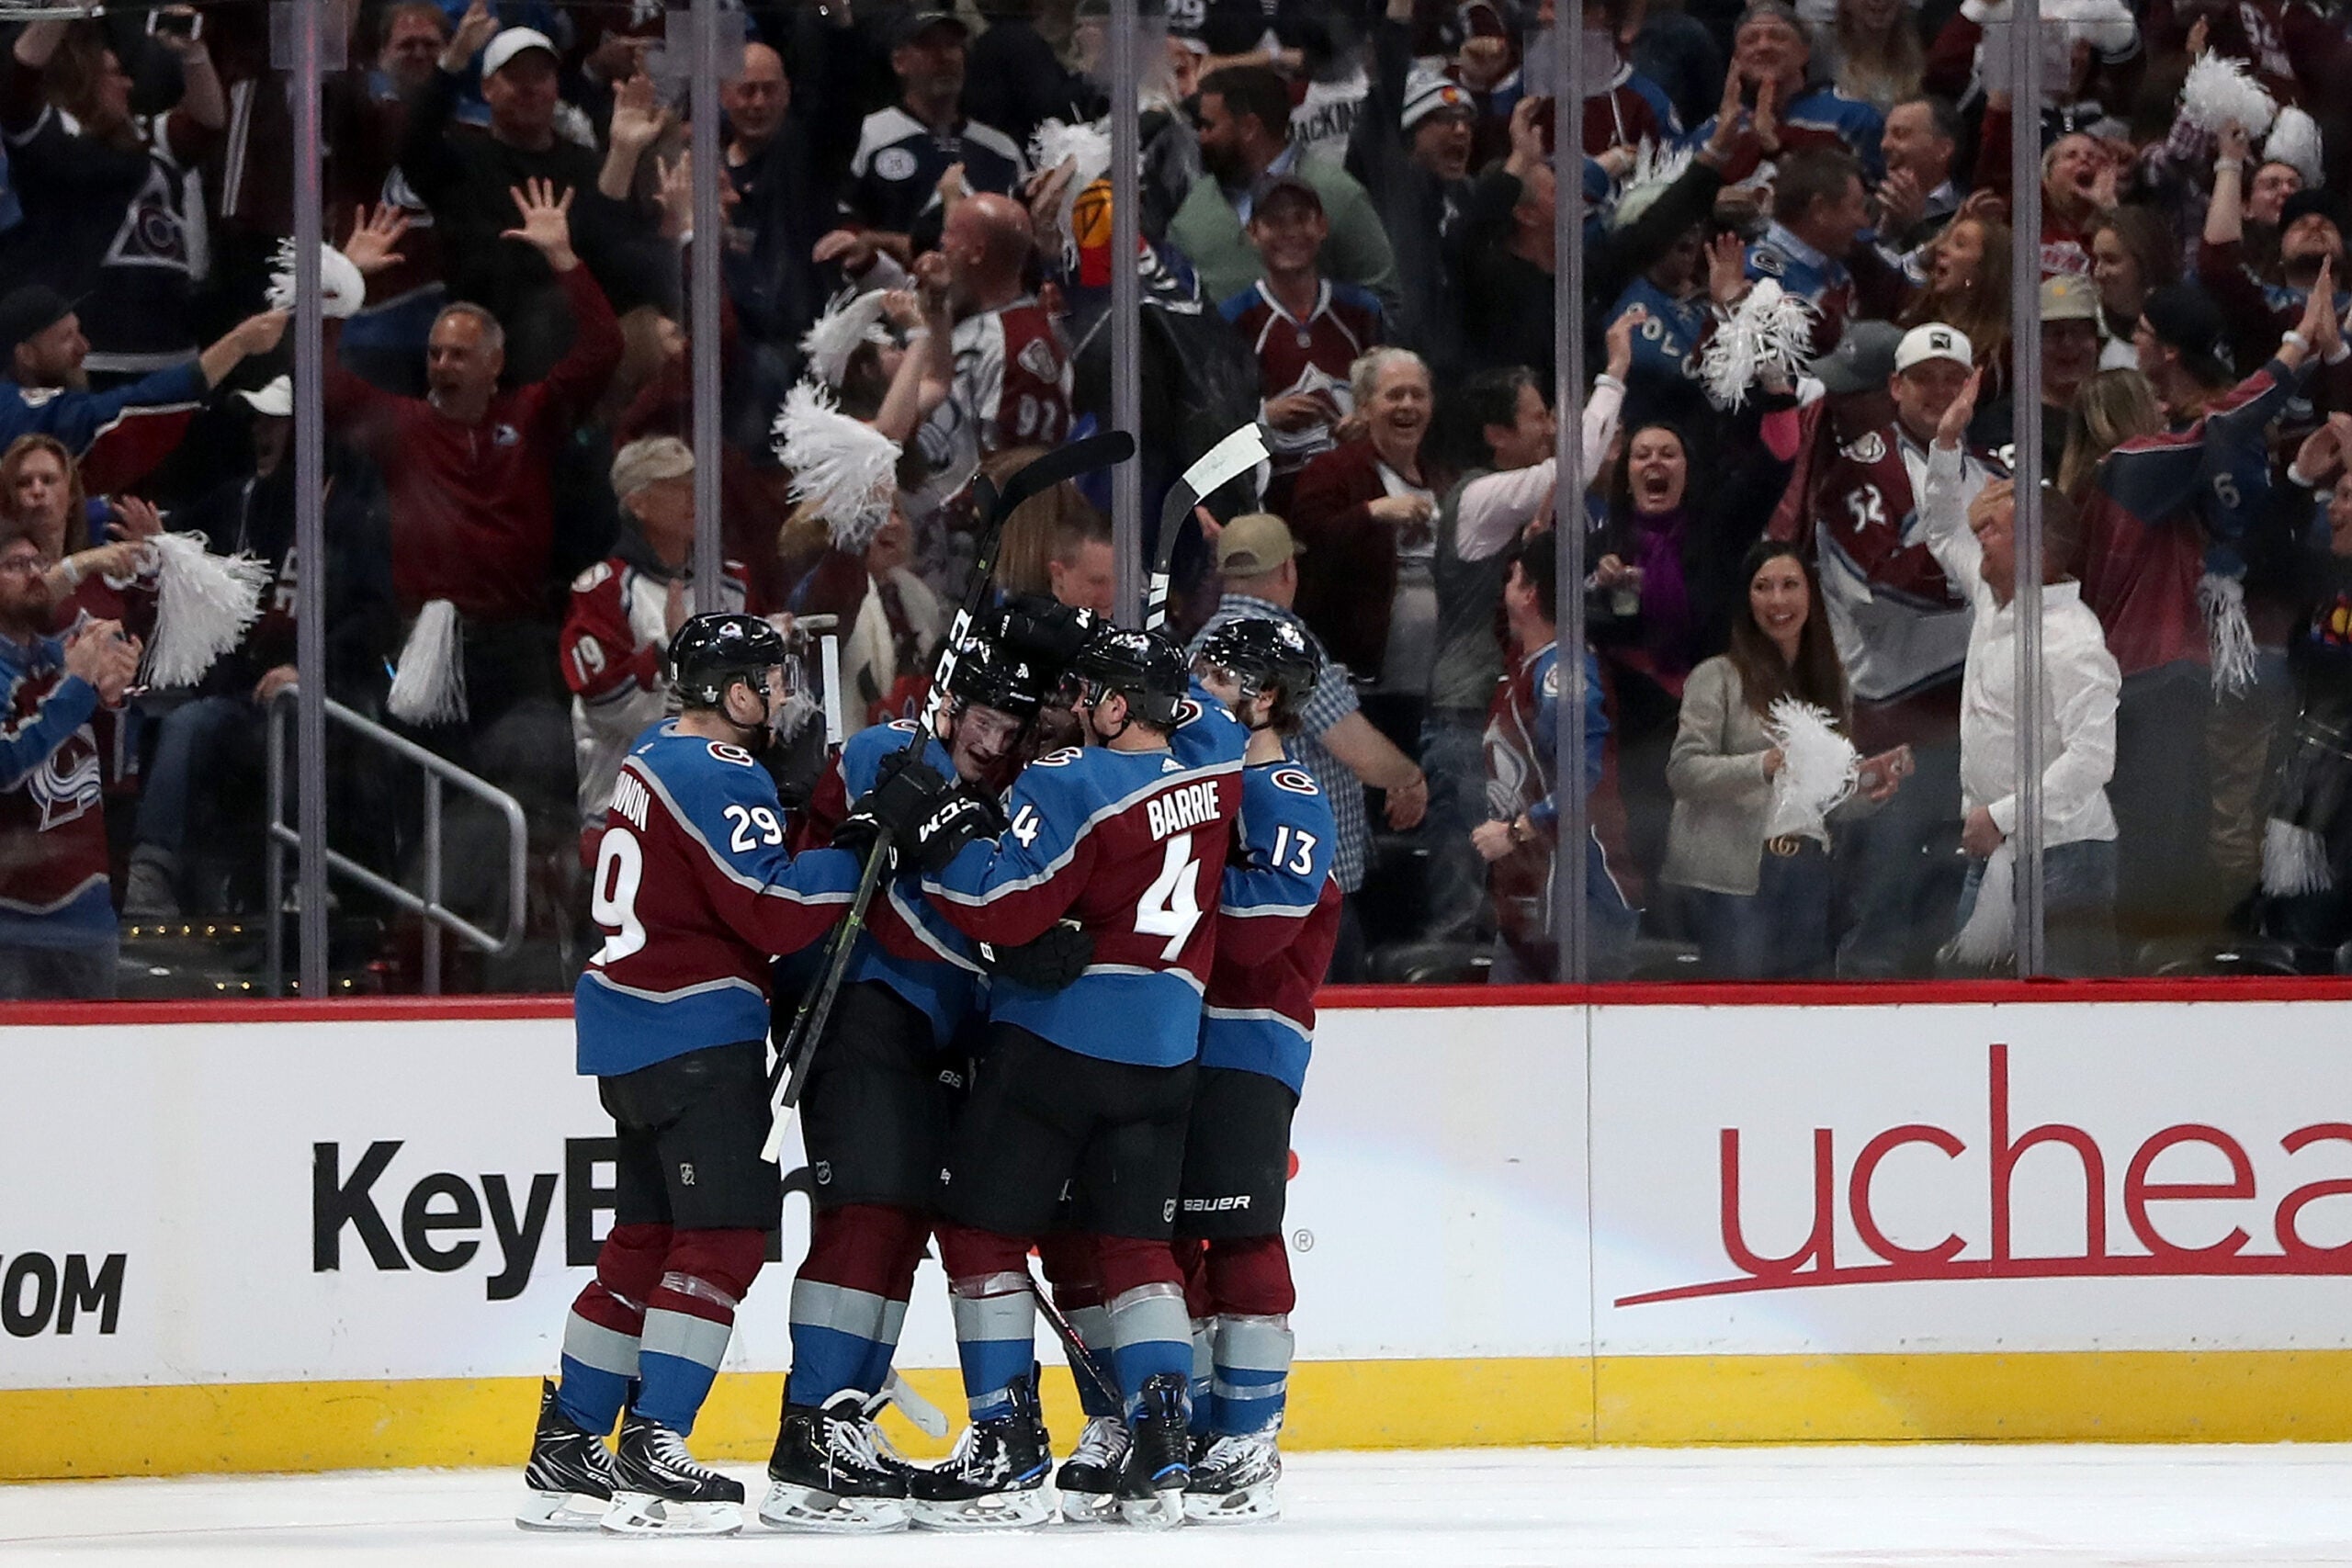 UMass star Cale Makar scores playoff goal in NHL debut for Colorado  Avalanche